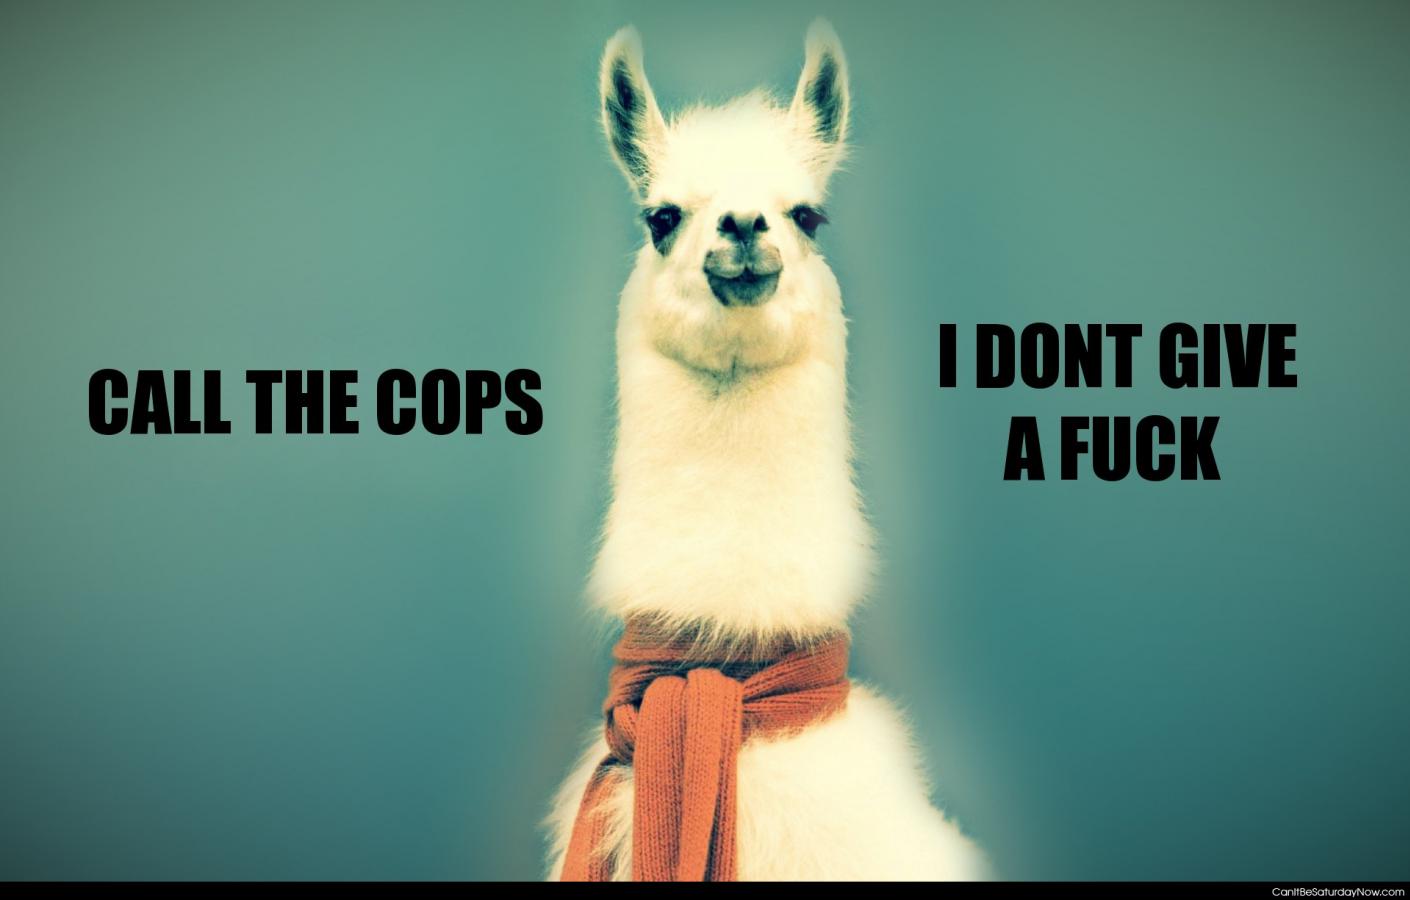 Call the cops - Calls the cops because this lama don't give a fuck